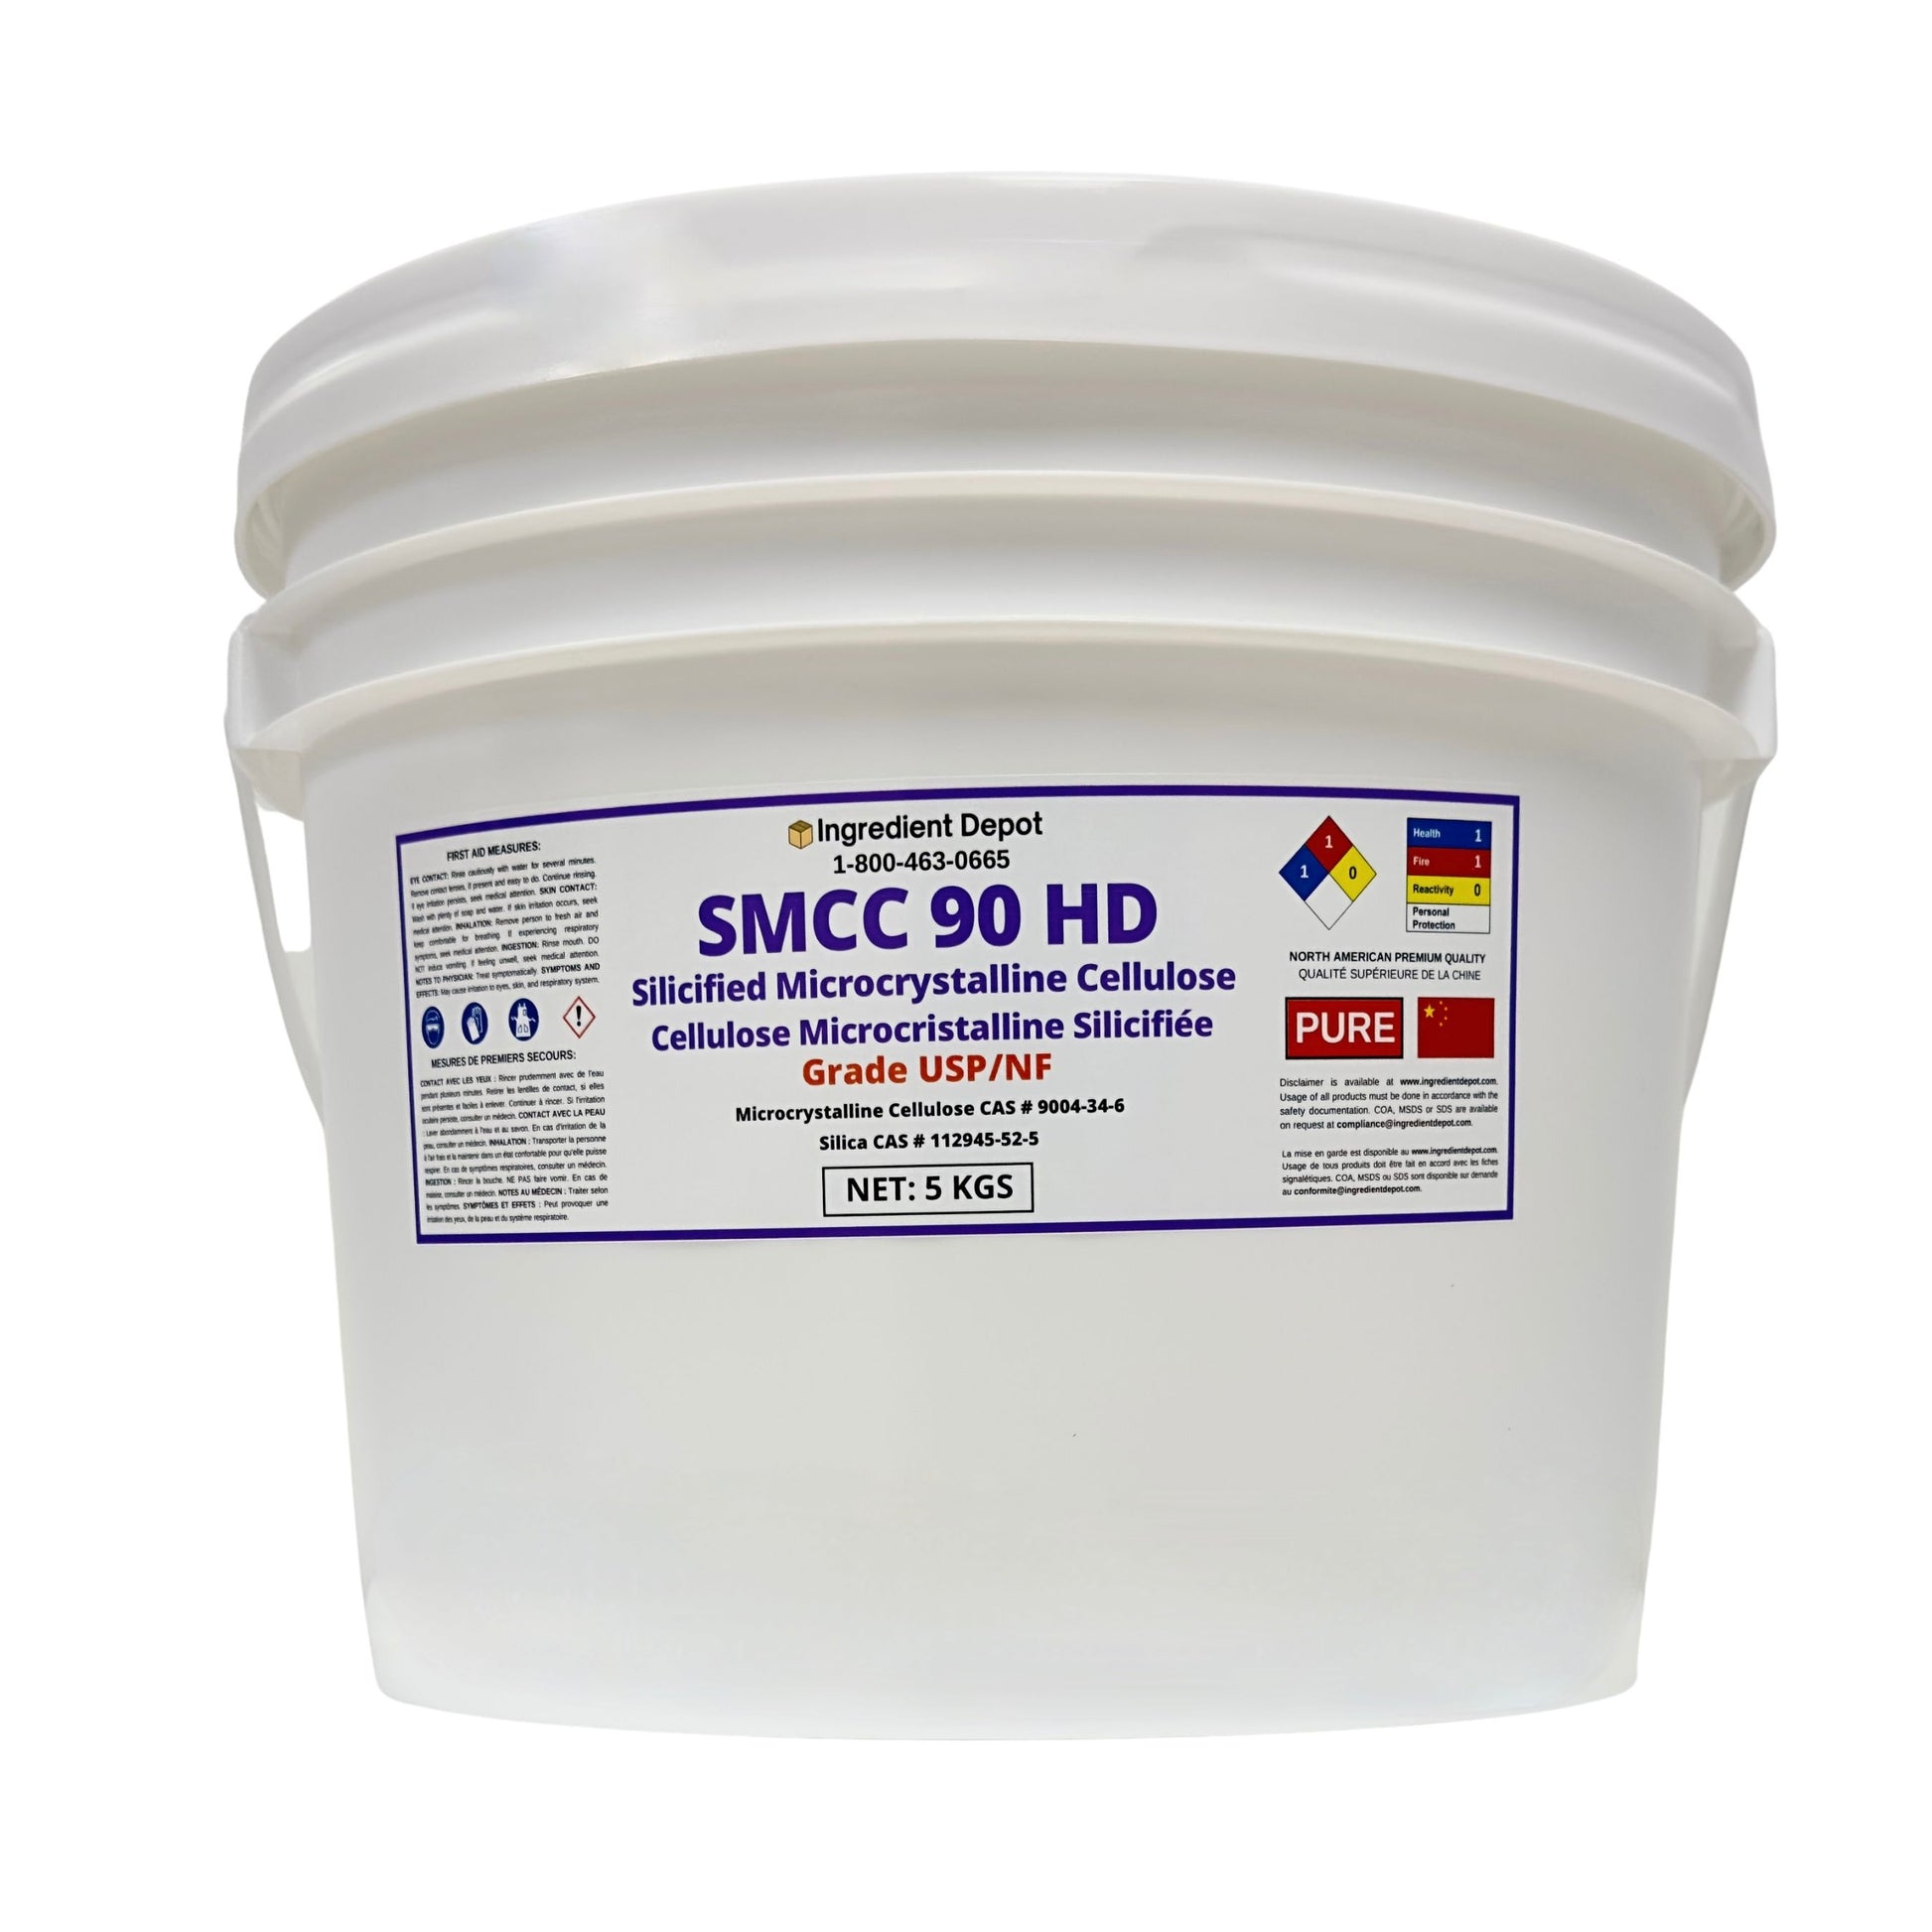 SMCC 90 HD Silicified Microcrystalline Cellulose - USP/NF Grade 5 kgs - Ingredient Depot